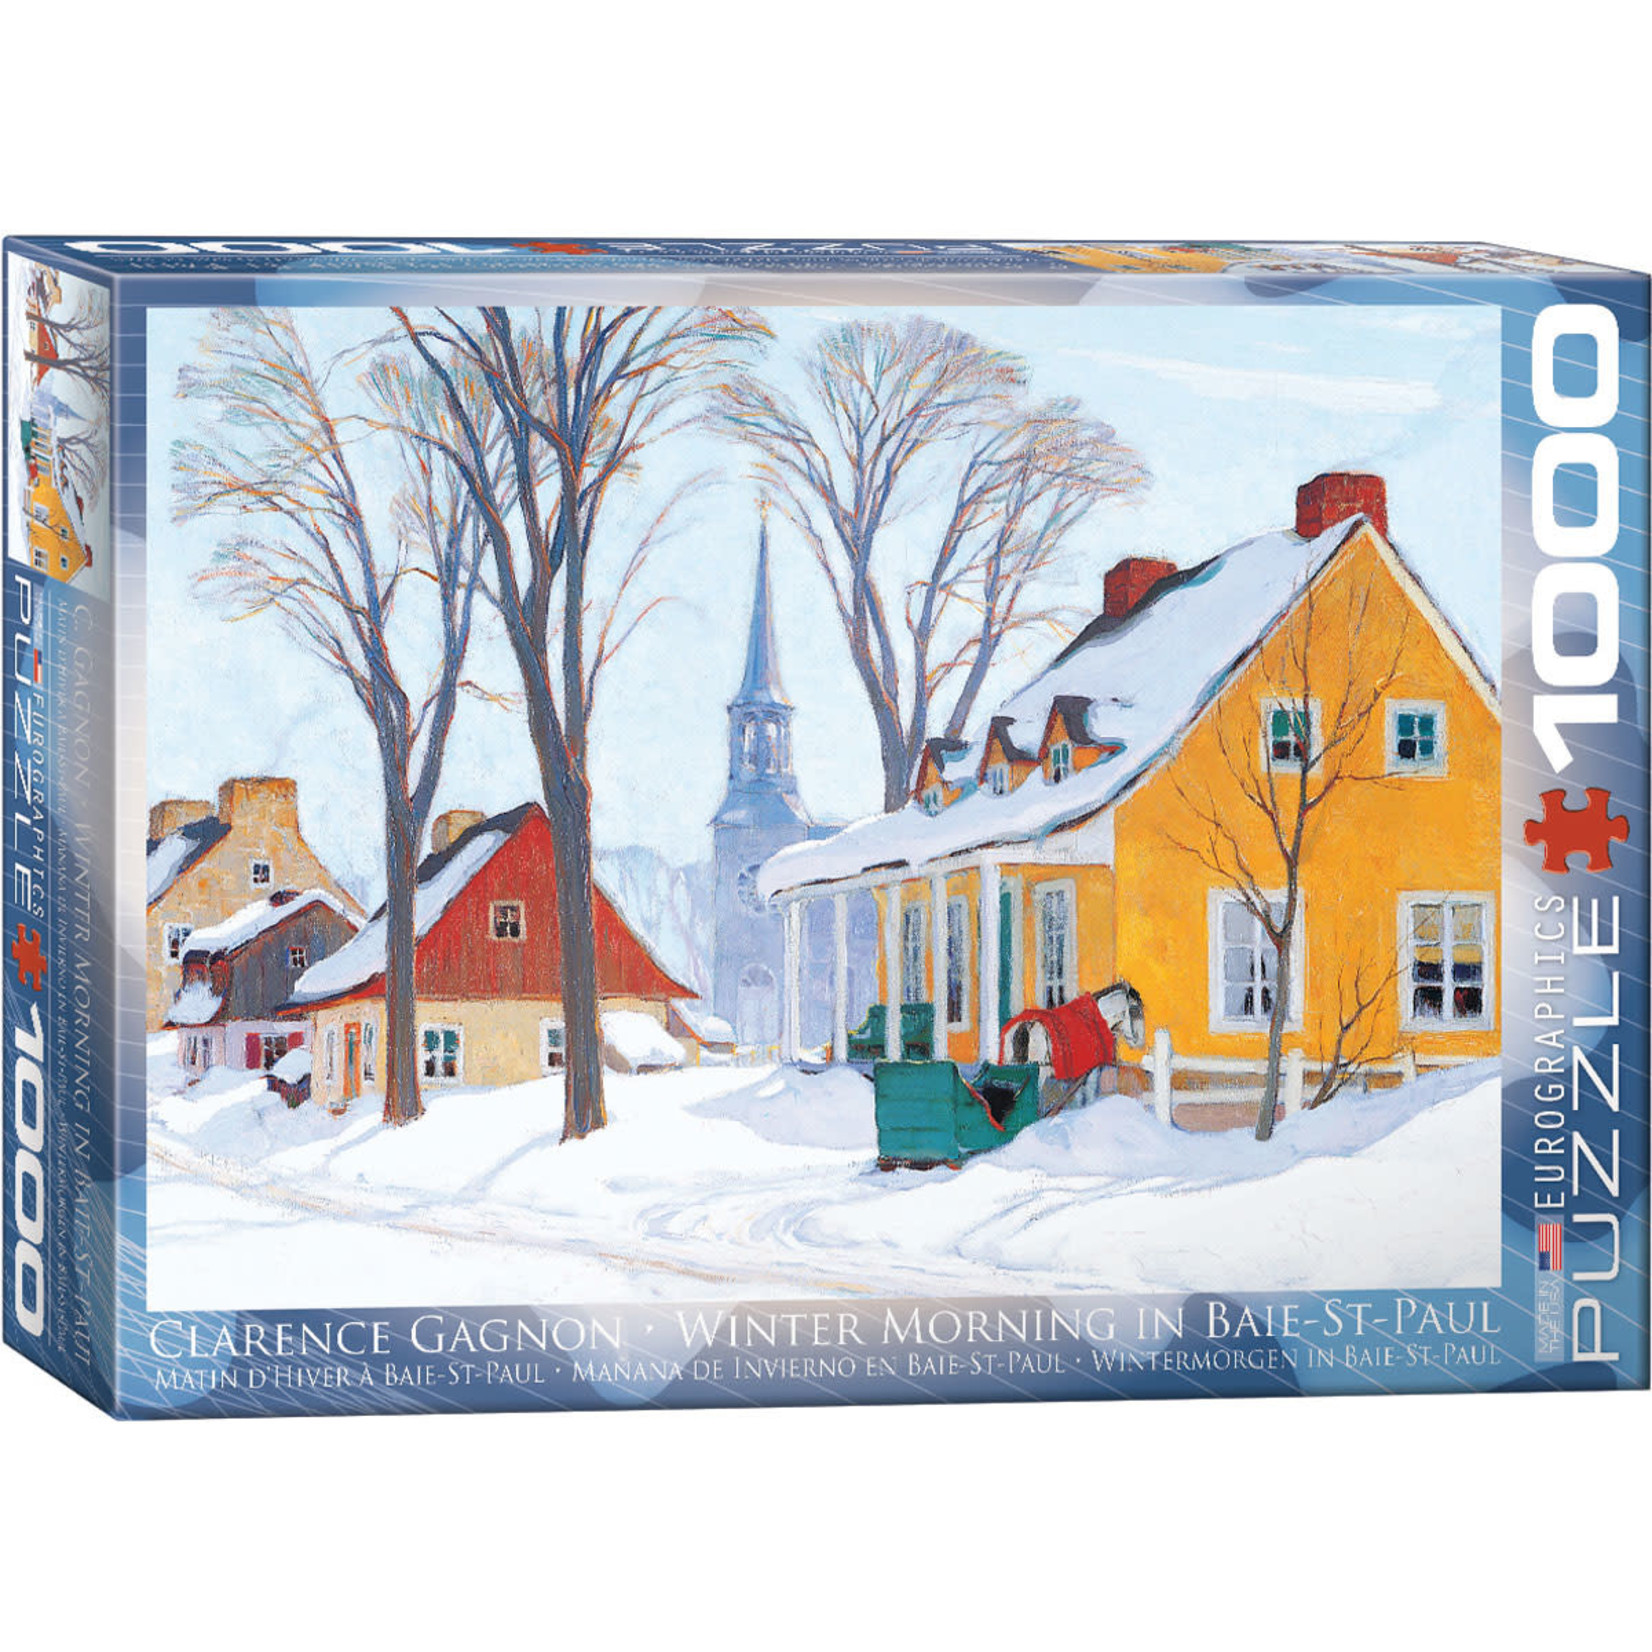 EuroGraphics Winter Morning in Baie-St-Paul 1000pc